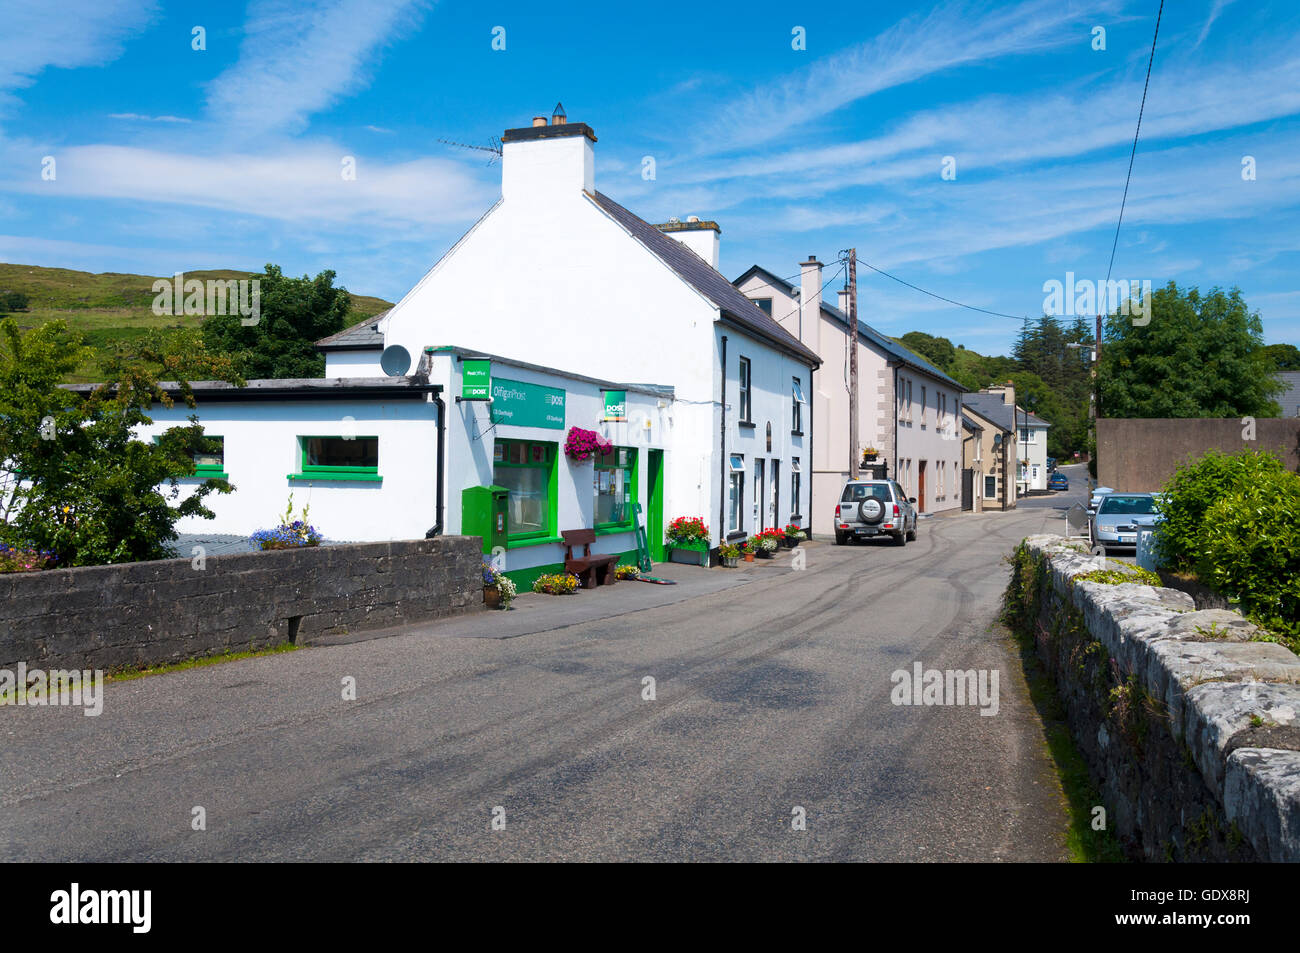 Post office at Kilcar, County Donegal, Ireland. Known as Cill Charthaigh in Irish language Gaelic. Stock Photo